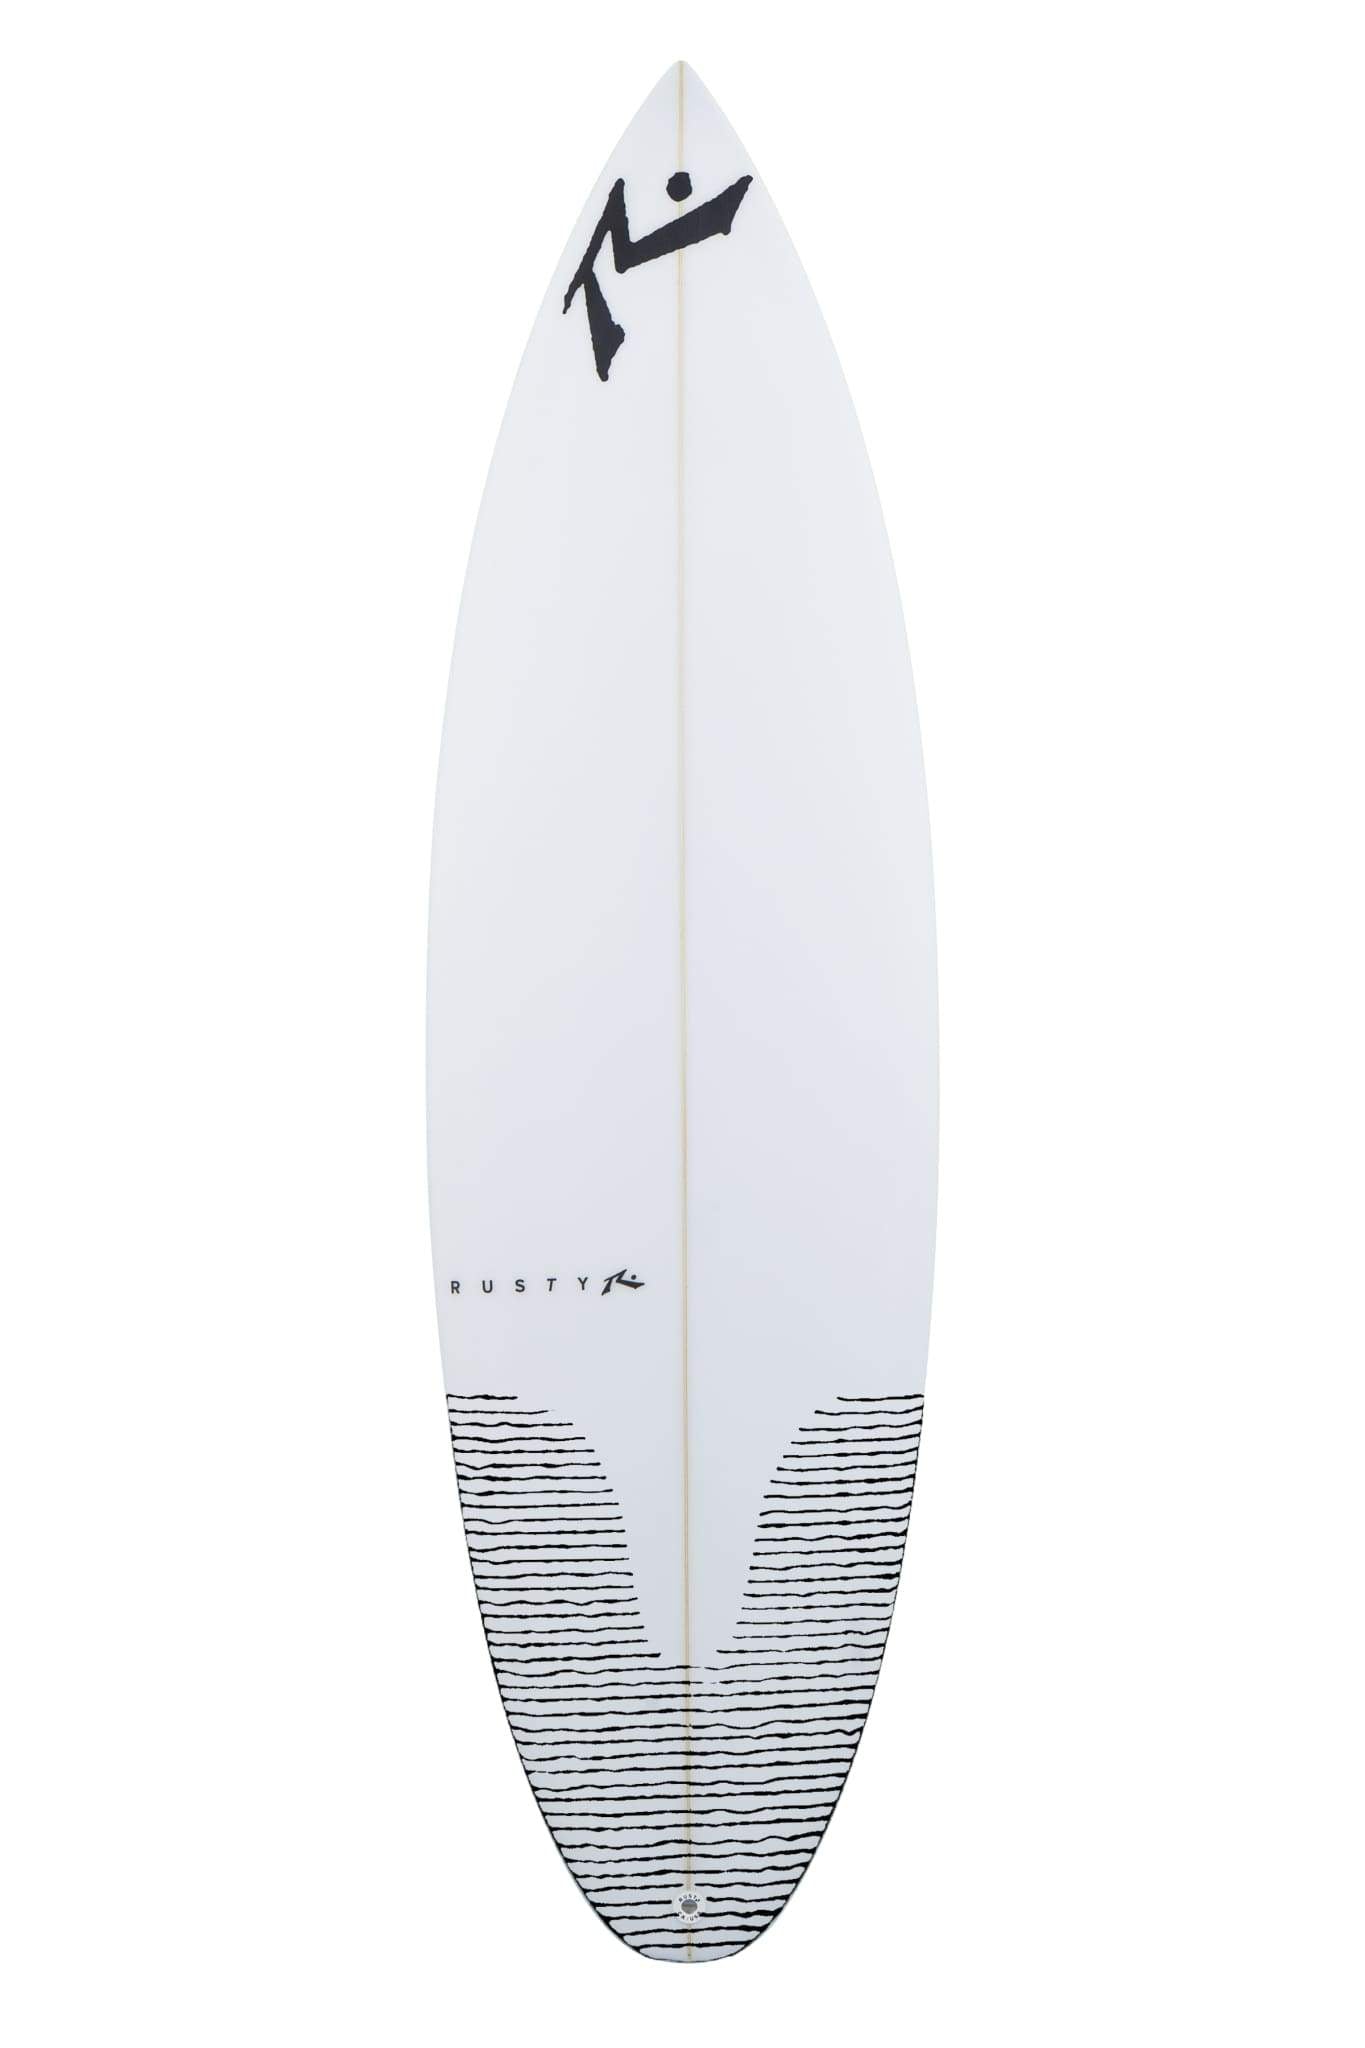 Enough Said-Surfboards-Rusty Surfboards ME